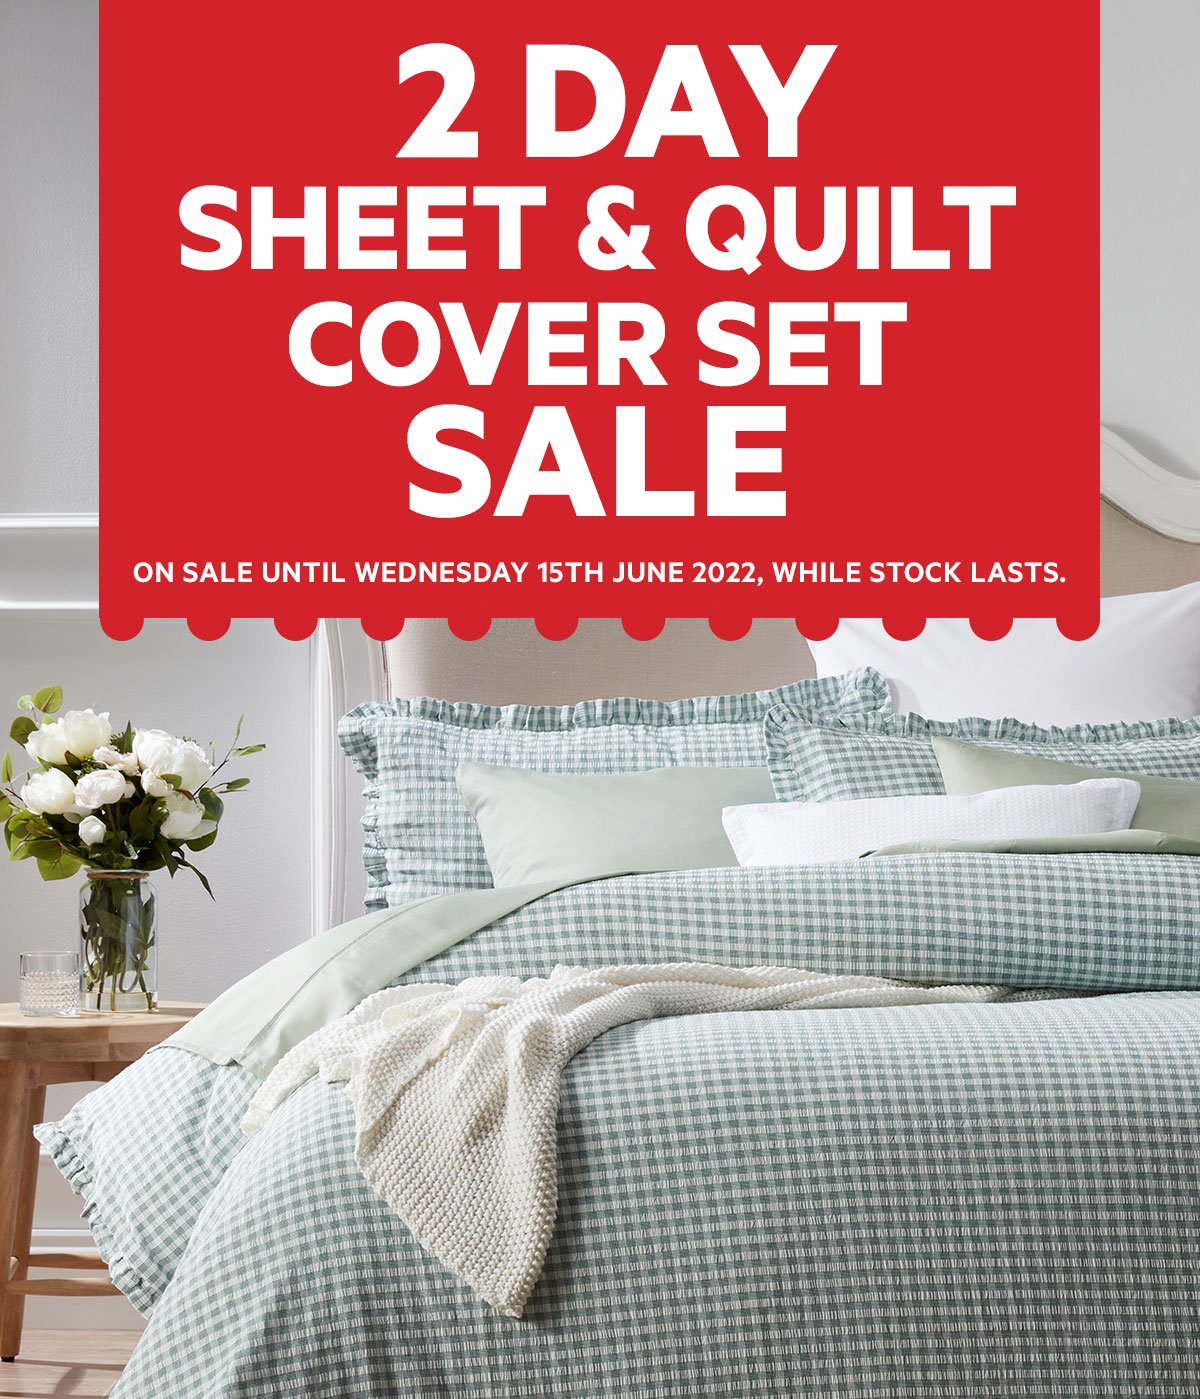 2 DAY SHEET & QUILT COVER SET SALE